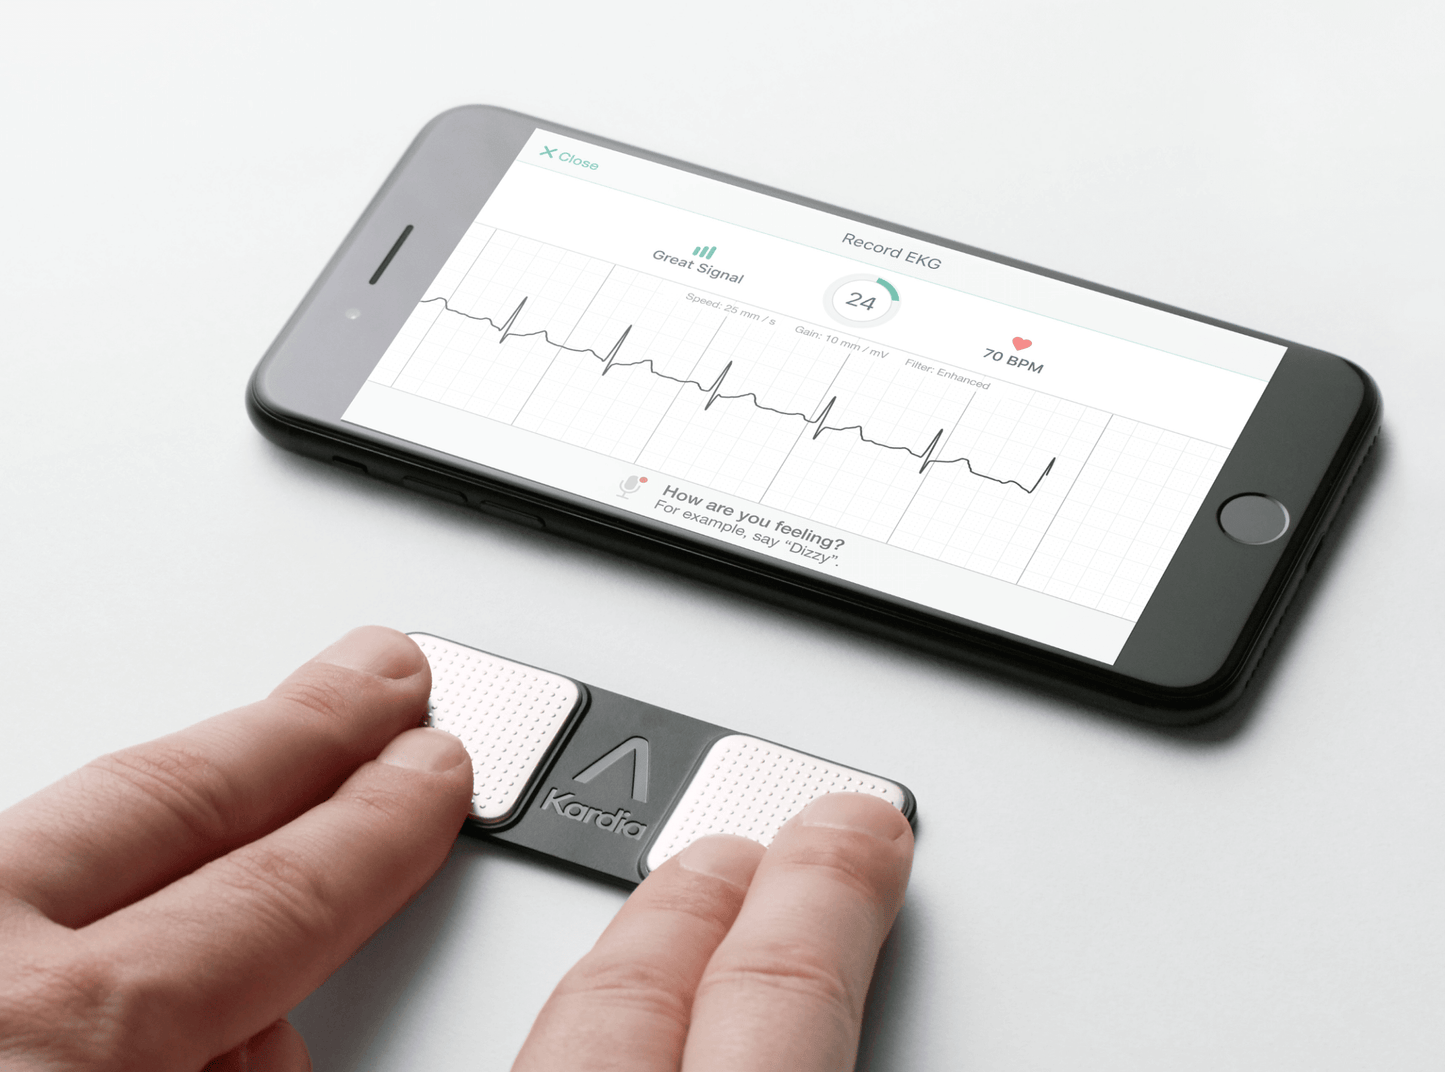 The Best Portable EKG for Healthcare Providers in 2022